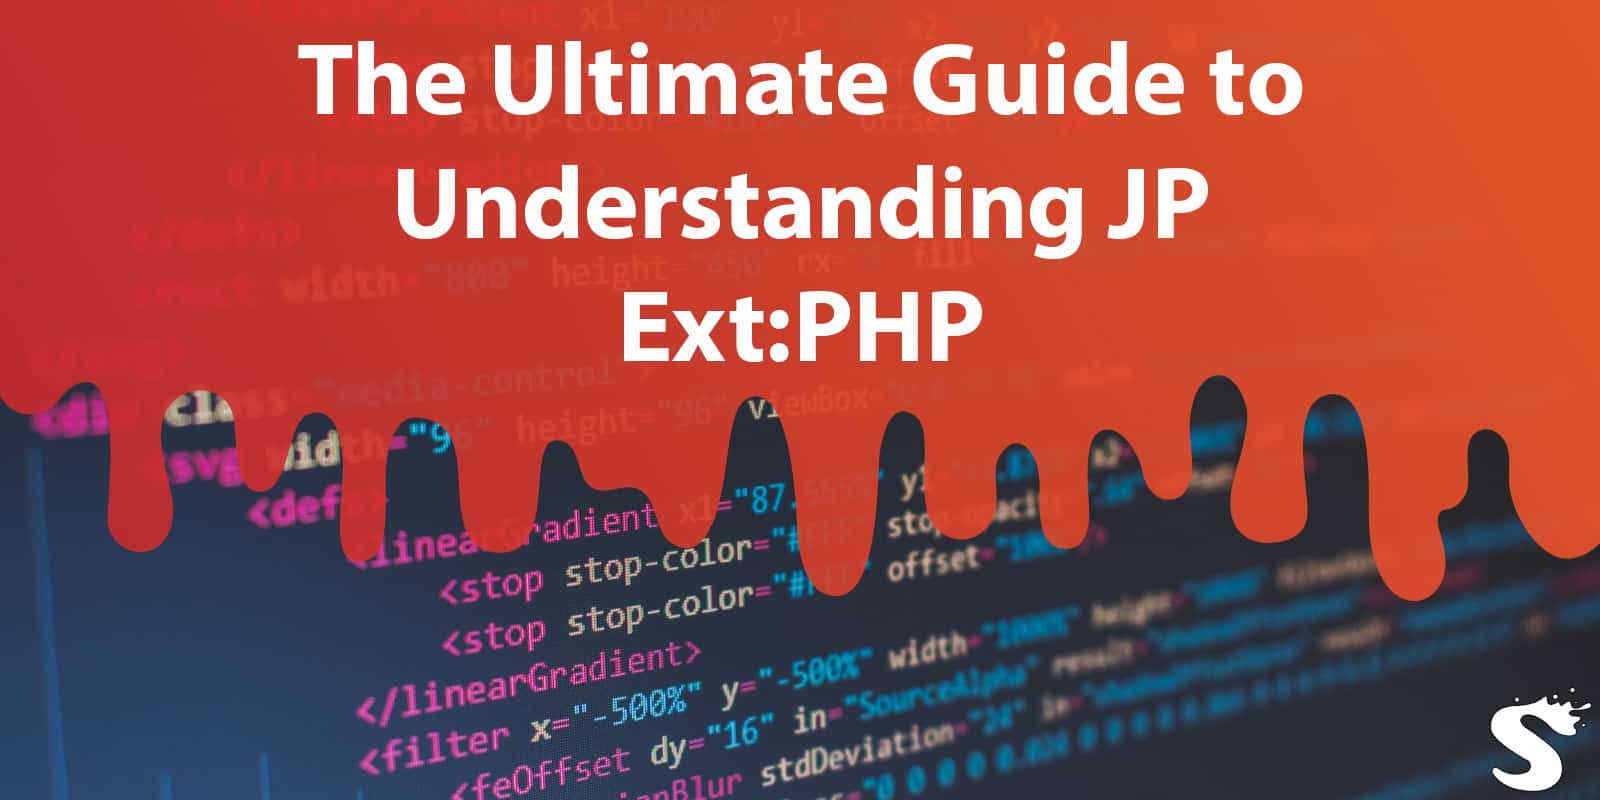 jp ext: php